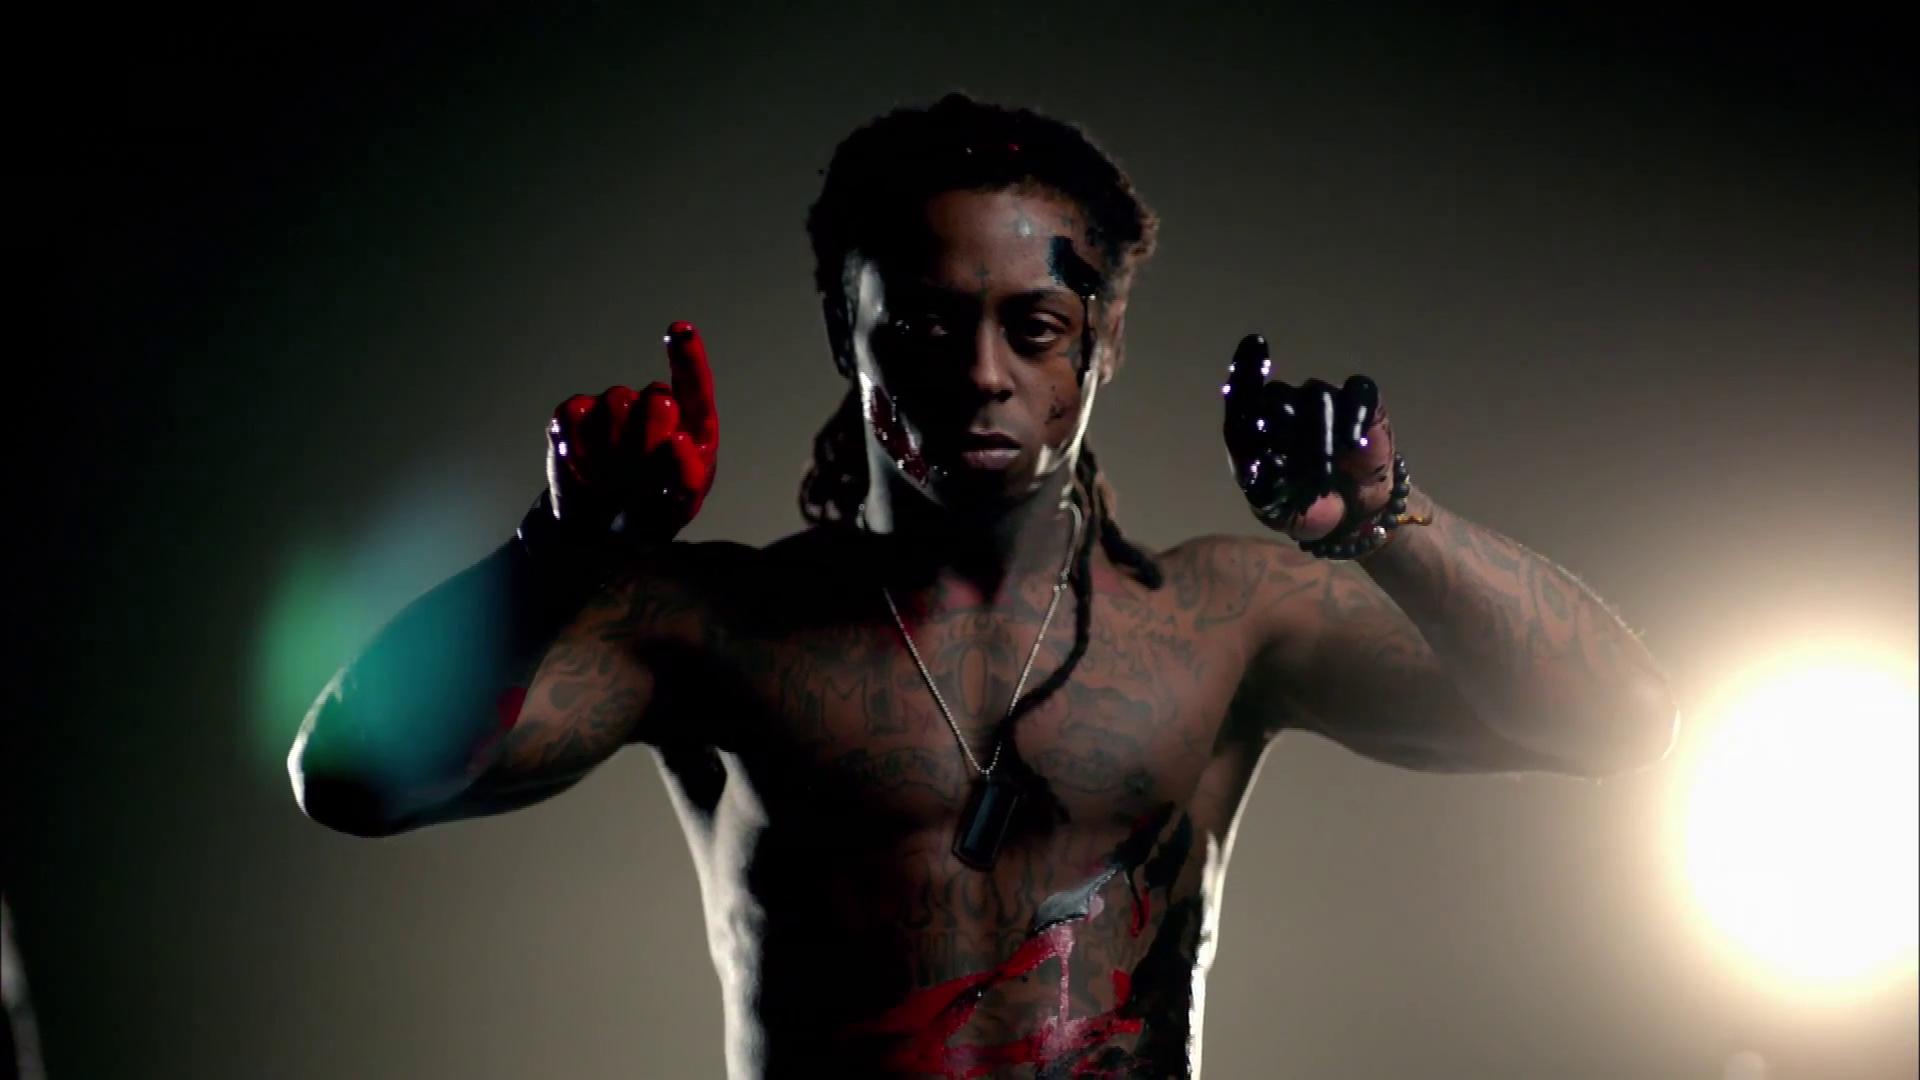 Lil Wayne Some New HD WallpapersHigh Defination - All HD Backgrounds